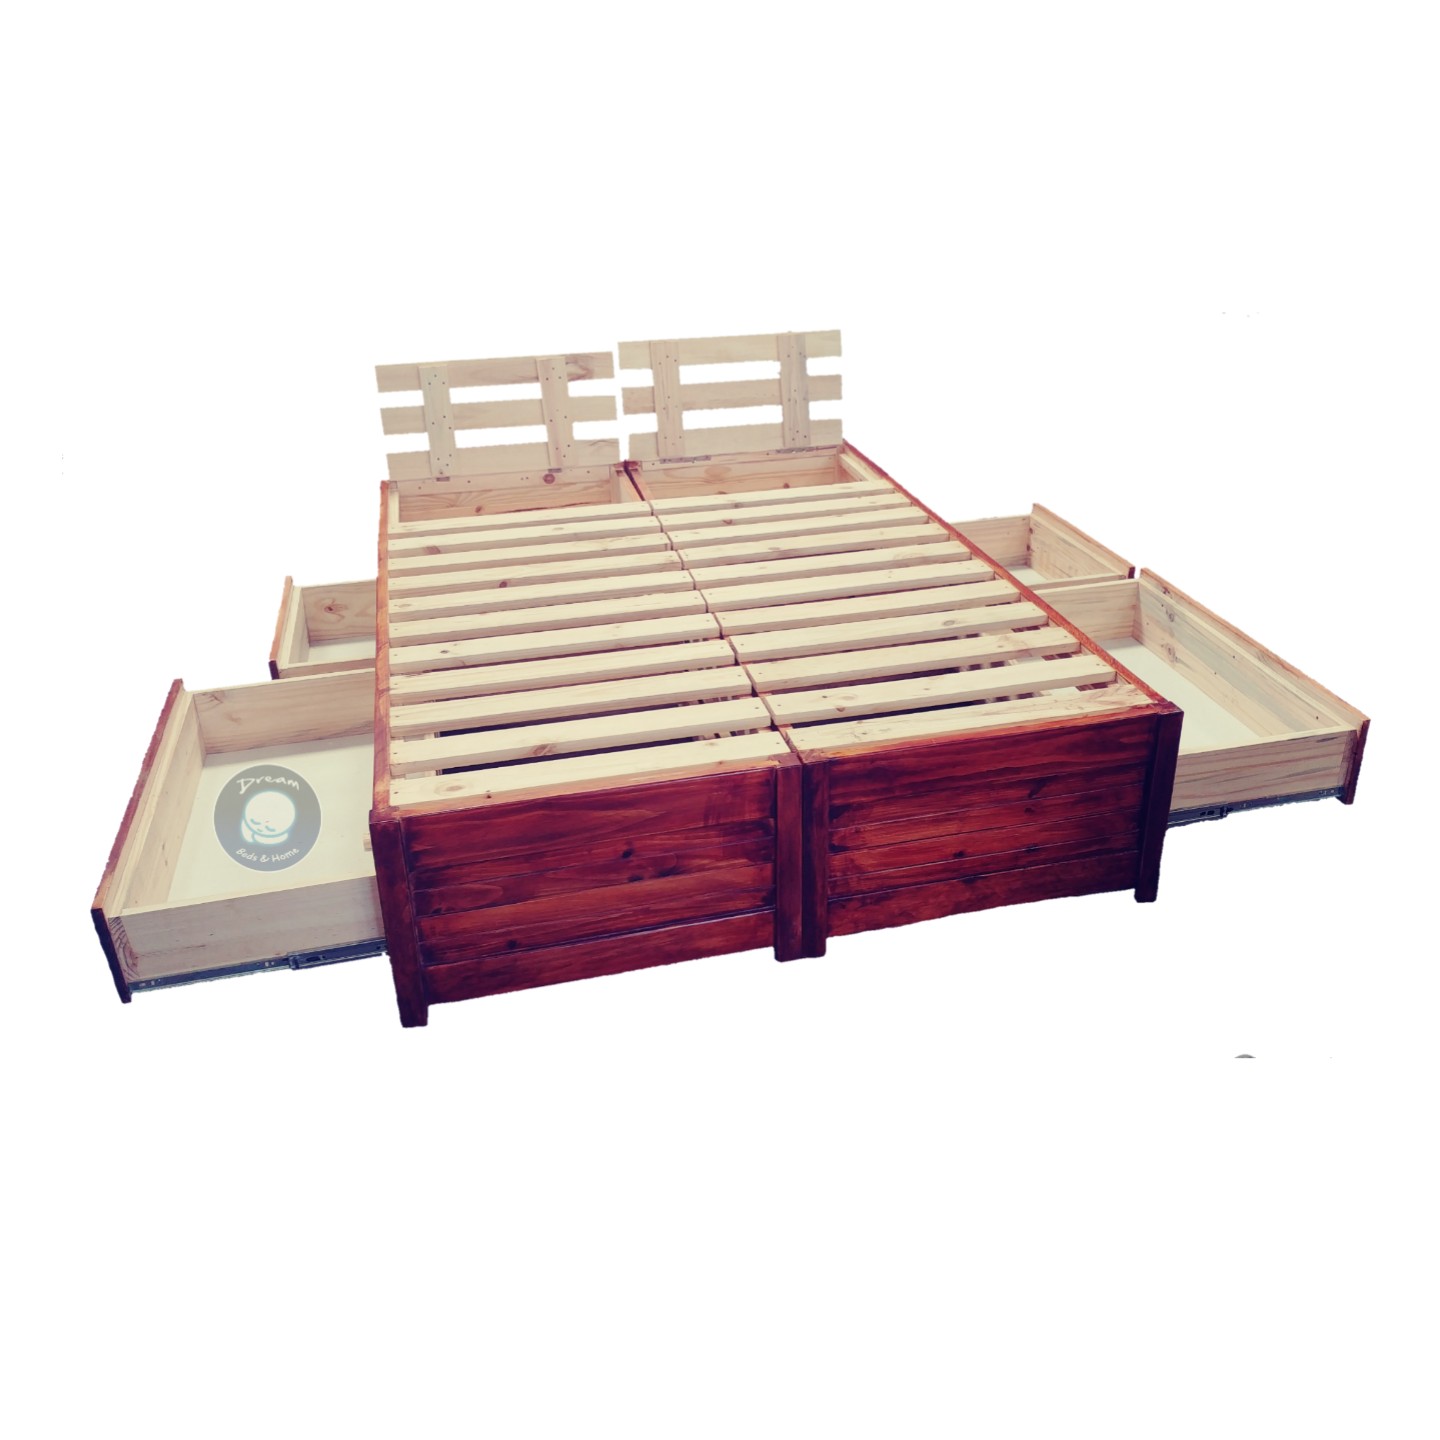 King Storage Bed Base With Drawers, Wooden King Size Bed With Storage Drawers